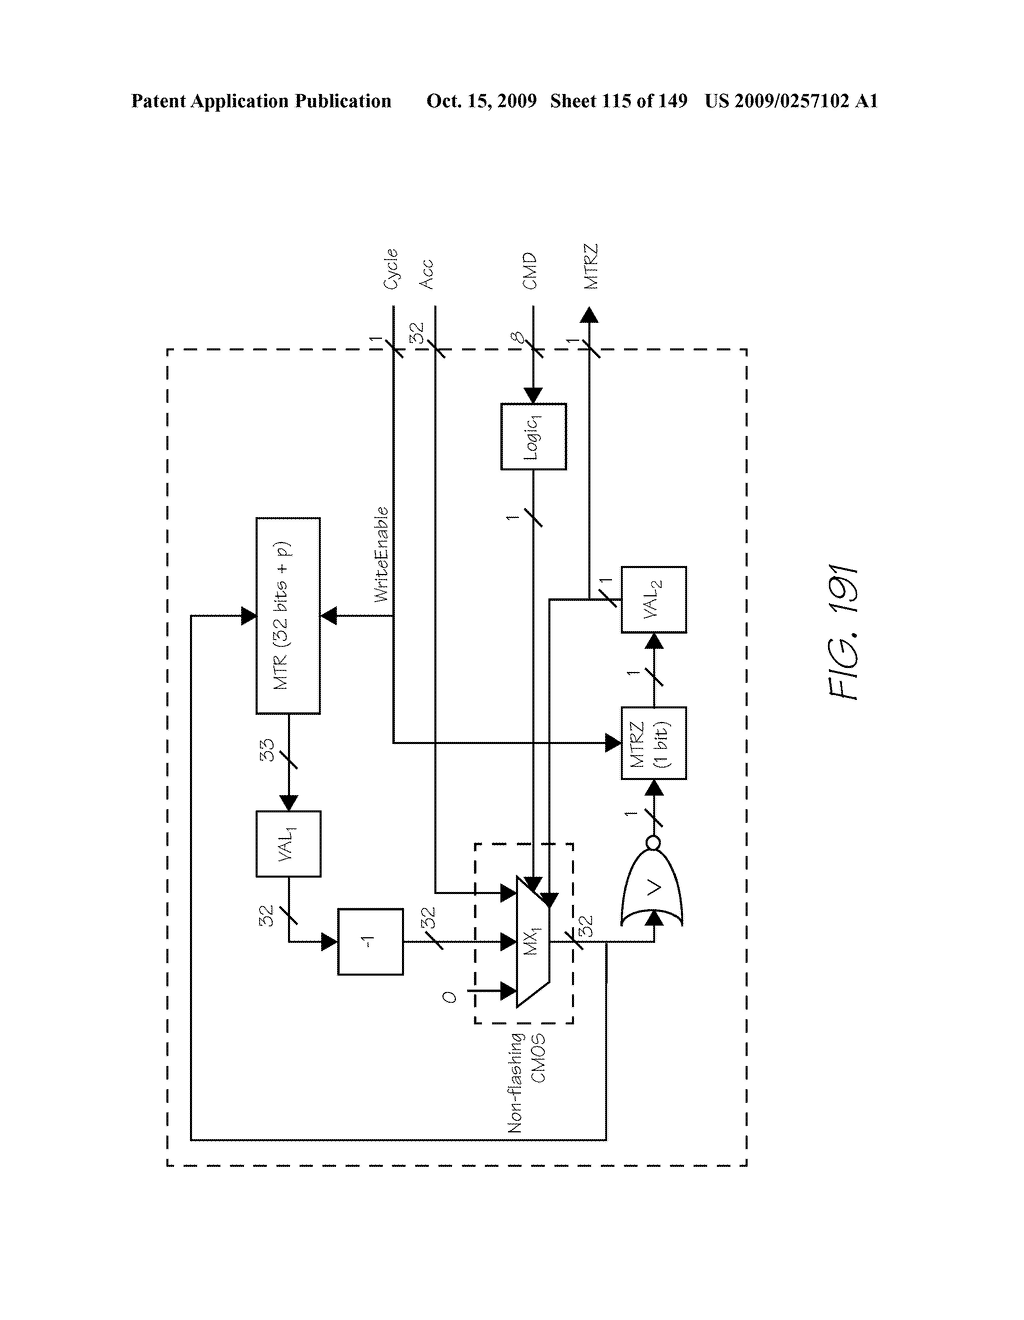 IMAGE PROCESSING APPARATUS HAVING CARD READER FOR APPLYING EFFECTS STORED ON A CARD TO A STORED IMAGE - diagram, schematic, and image 116